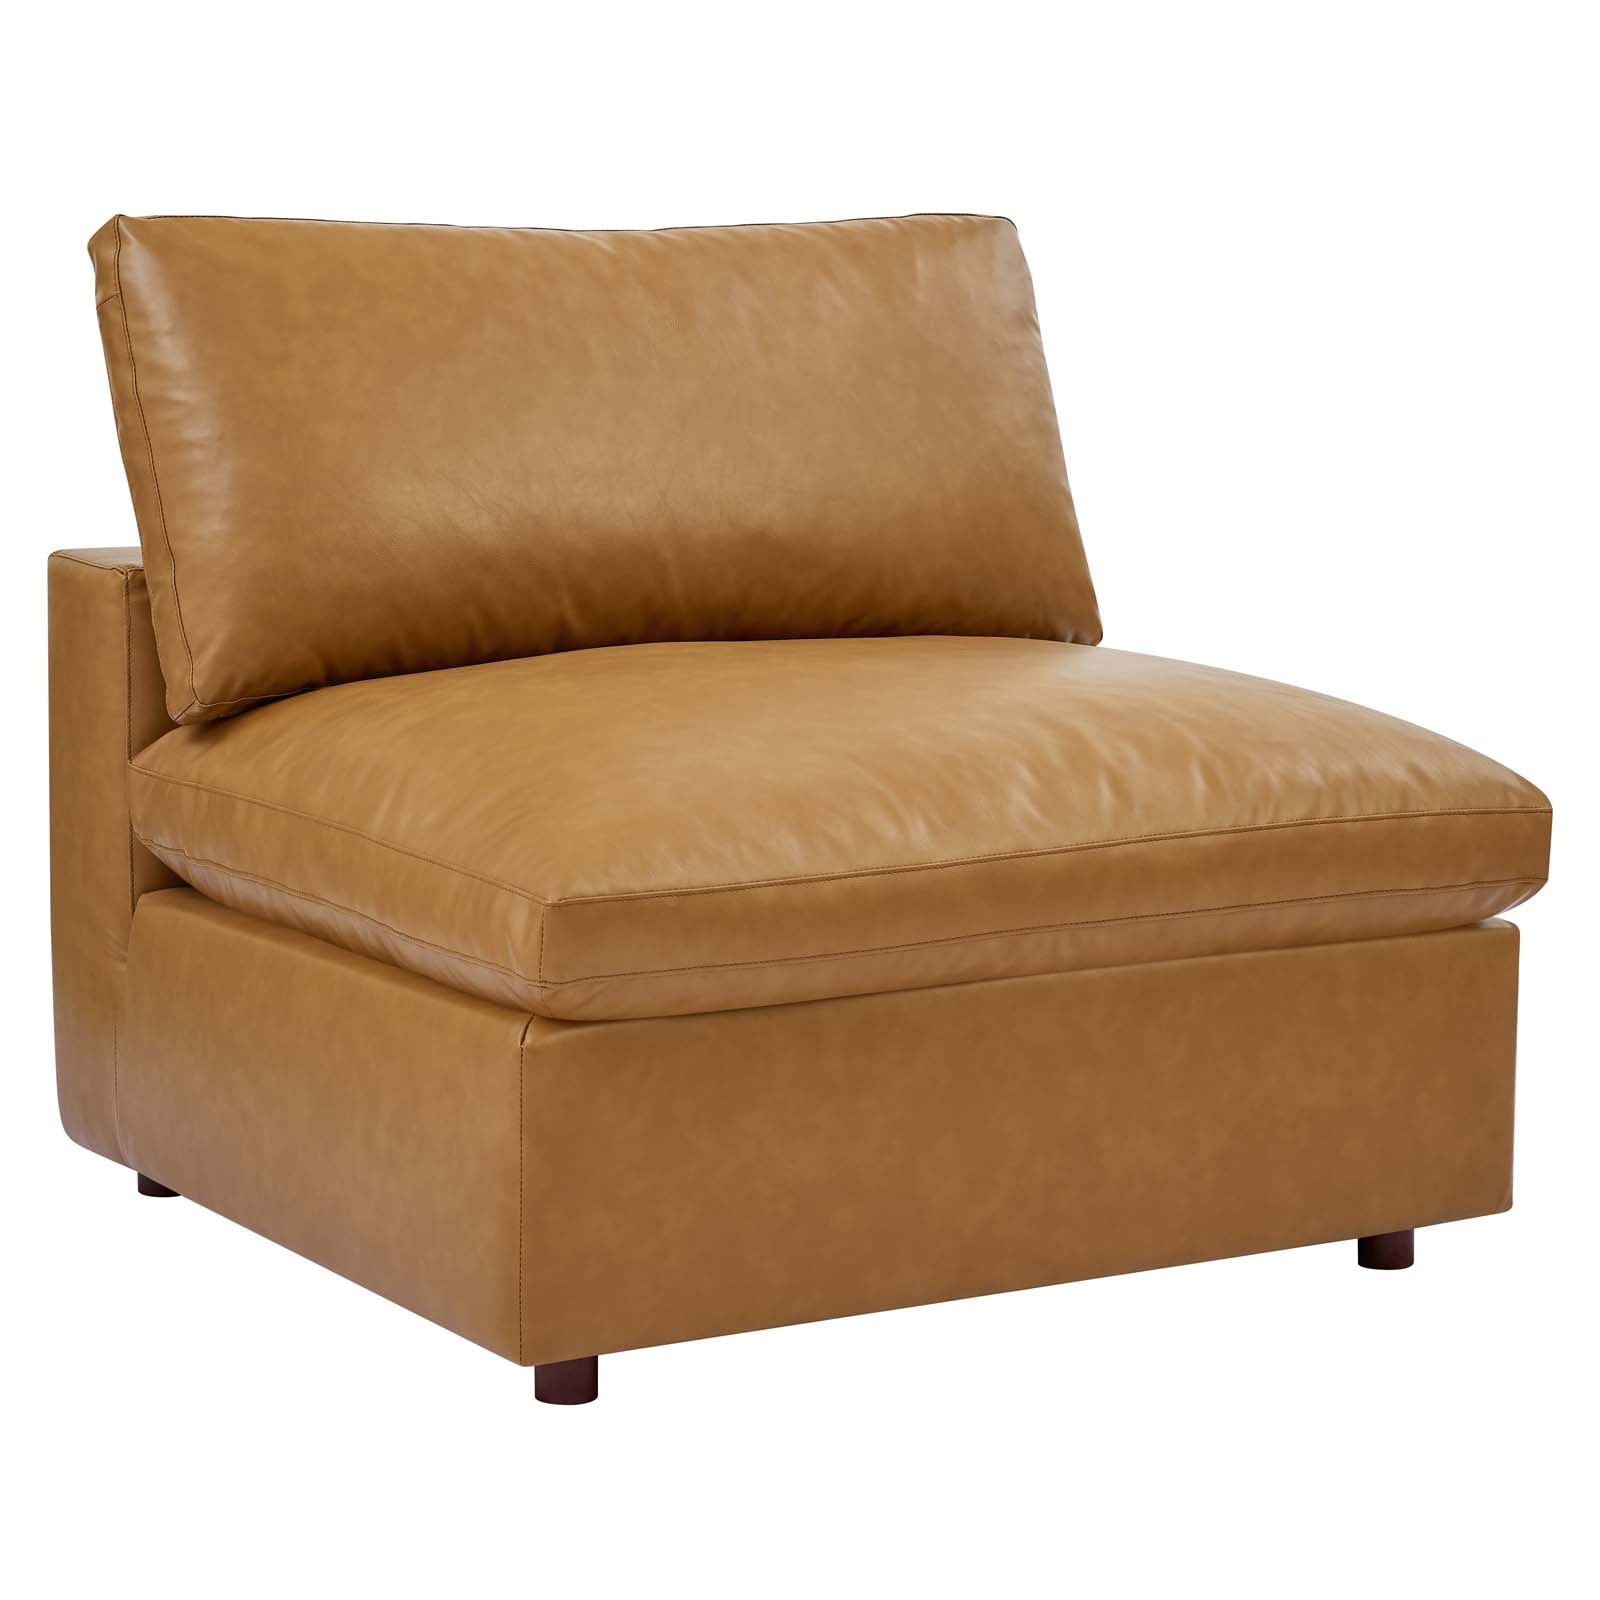 Modway Accent Chairs - Commix Down Filled Overstuffed Vegan Leather Armless Chair Tan